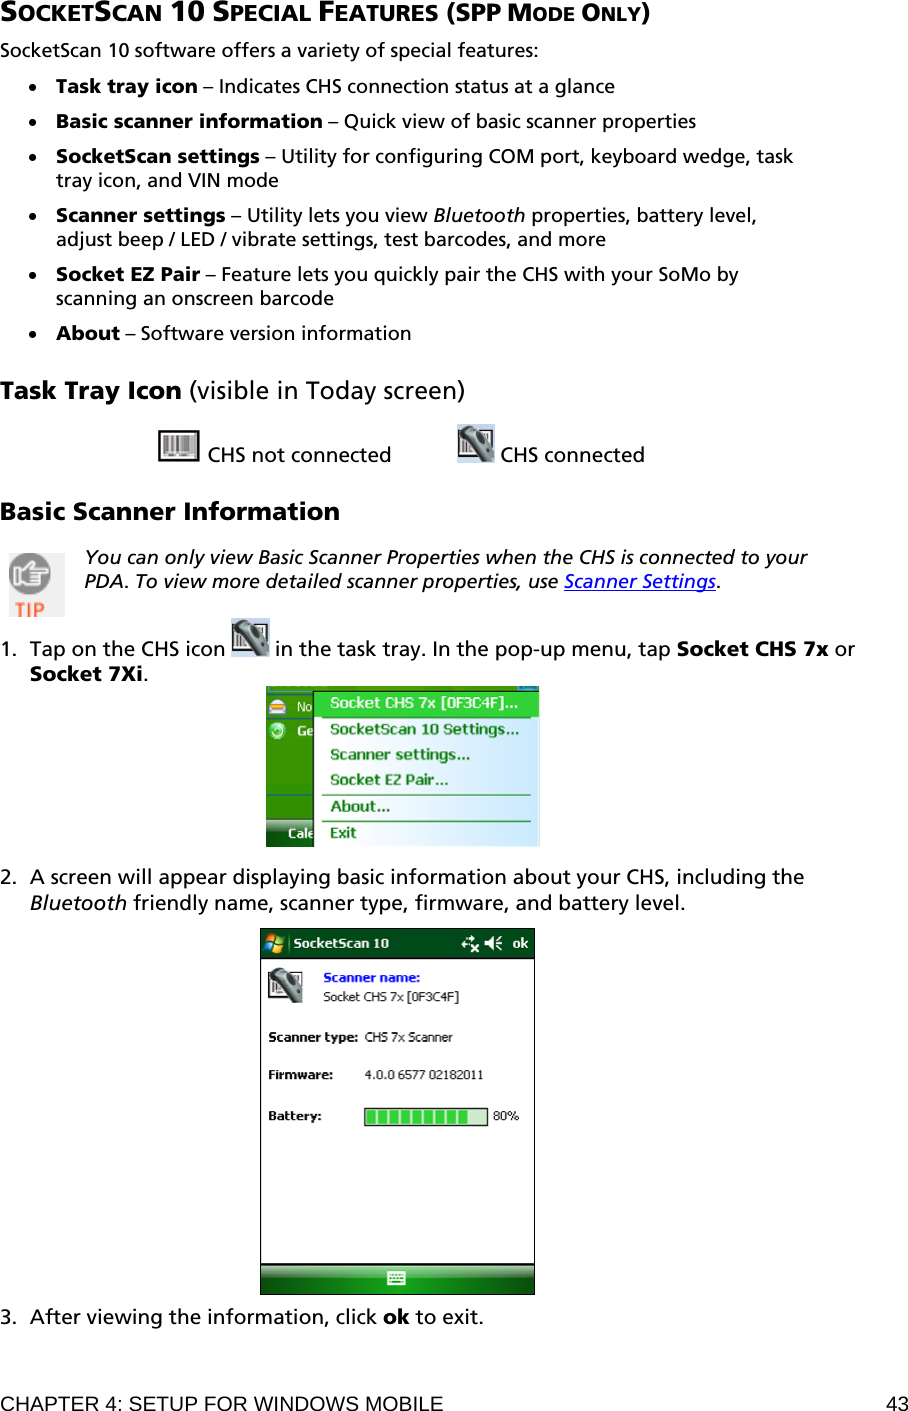 CHAPTER 4: SETUP FOR WINDOWS MOBILE  43 SOCKETSCAN 10 SPECIAL FEATURES (SPP MODE ONLY)  SocketScan 10 software offers a variety of special features:  • Task tray icon – Indicates CHS connection status at a glance  • Basic scanner information – Quick view of basic scanner properties  • SocketScan settings – Utility for configuring COM port, keyboard wedge, task tray icon, and VIN mode  • Scanner settings – Utility lets you view Bluetooth properties, battery level, adjust beep / LED / vibrate settings, test barcodes, and more  • Socket EZ Pair – Feature lets you quickly pair the CHS with your SoMo by scanning an onscreen barcode  • About – Software version information  Task Tray Icon (visible in Today screen)   CHS not connected     CHS connected  Basic Scanner Information  You can only view Basic Scanner Properties when the CHS is connected to your PDA. To view more detailed scanner properties, use Scanner Settings.  1. Tap on the CHS icon   in the task tray. In the pop-up menu, tap Socket CHS 7x or  Socket 7Xi.   2. A screen will appear displaying basic information about your CHS, including the Bluetooth friendly name, scanner type, firmware, and battery level.    3. After viewing the information, click ok to exit. 